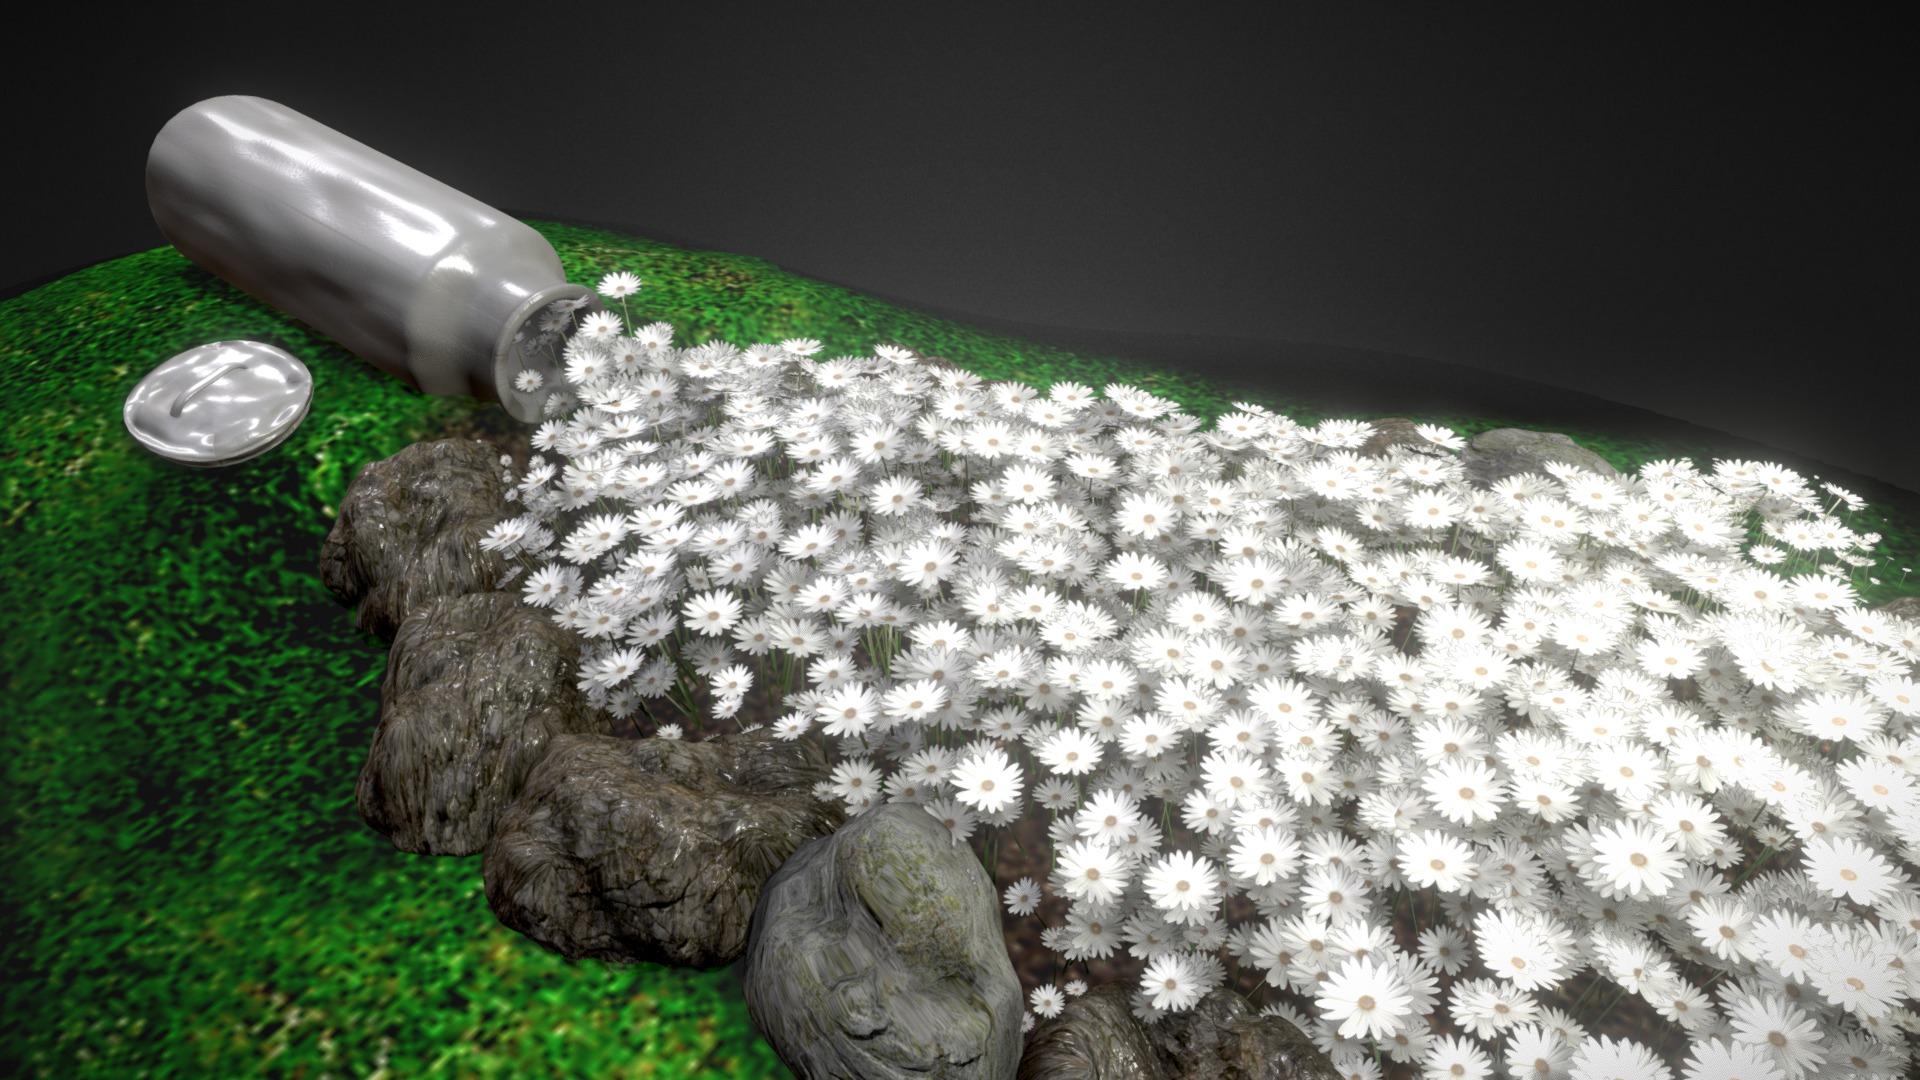 3D model Flowerbed - This is a 3D model of the Flowerbed. The 3D model is about a turtle on grass.